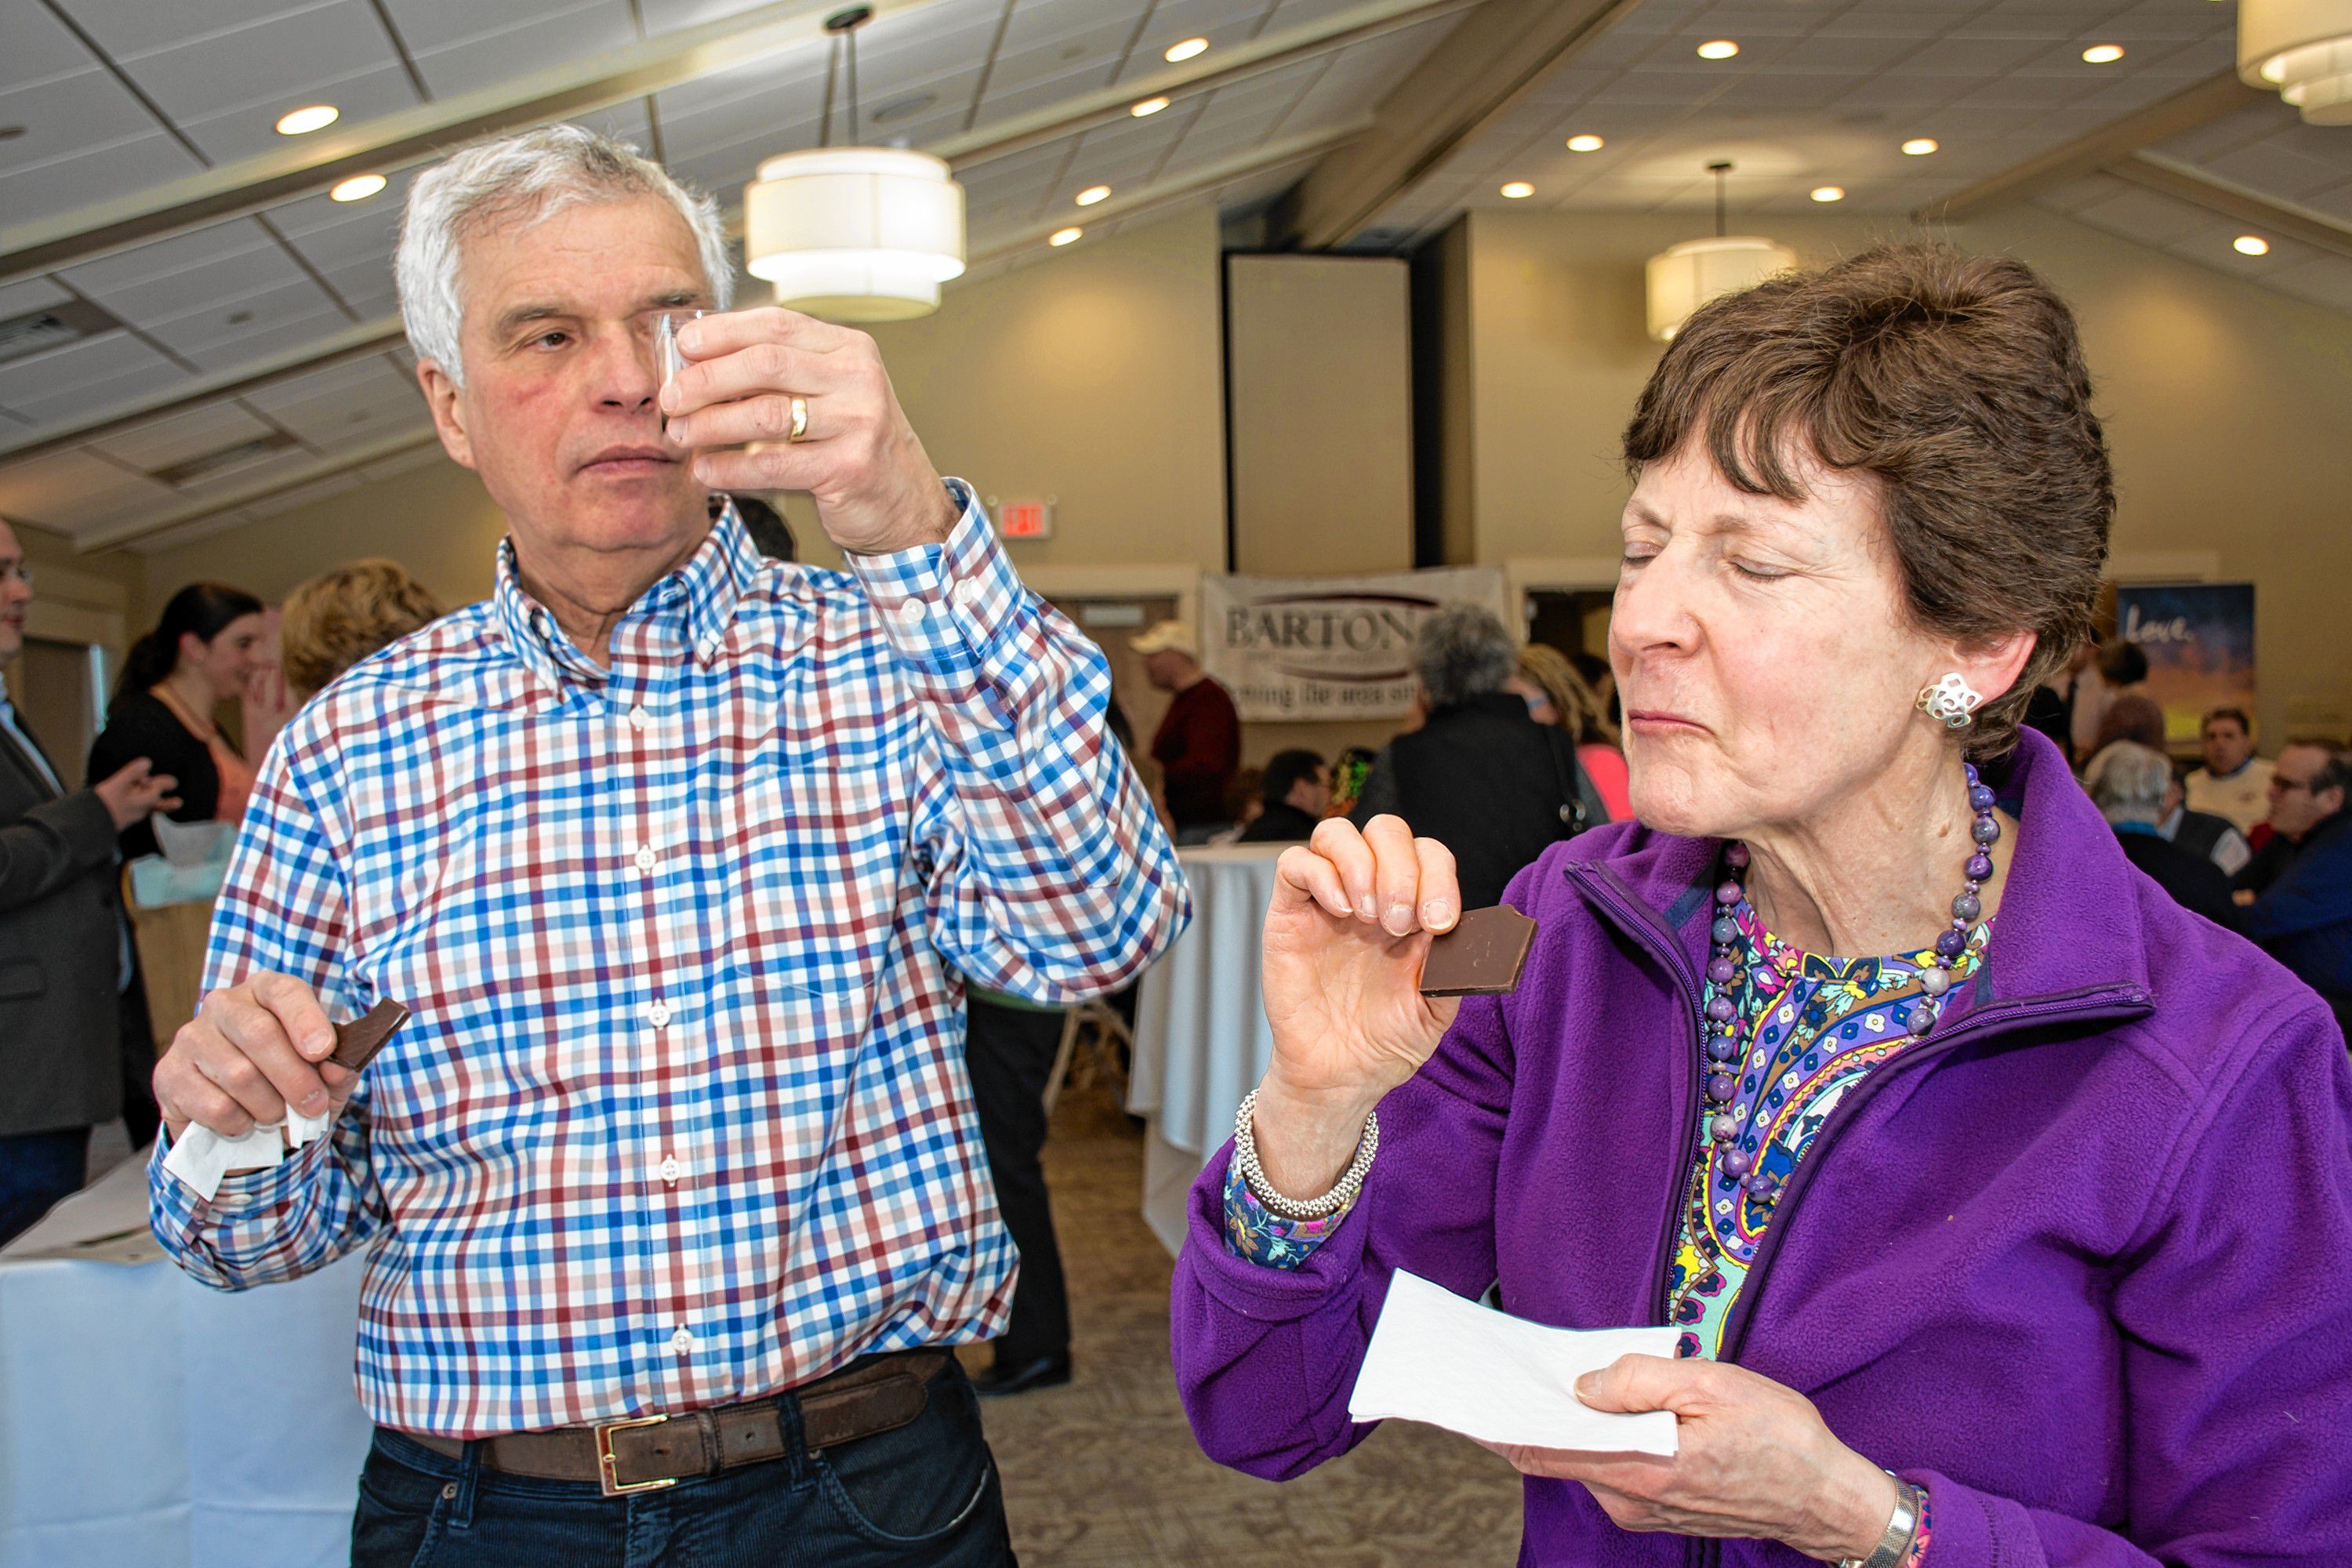 Milton and Rhonda Weinstein of Eastman and Boston enjoy the paired wine and chocolates at the Lindt table. Nancy Nutile-McMenemy photograph